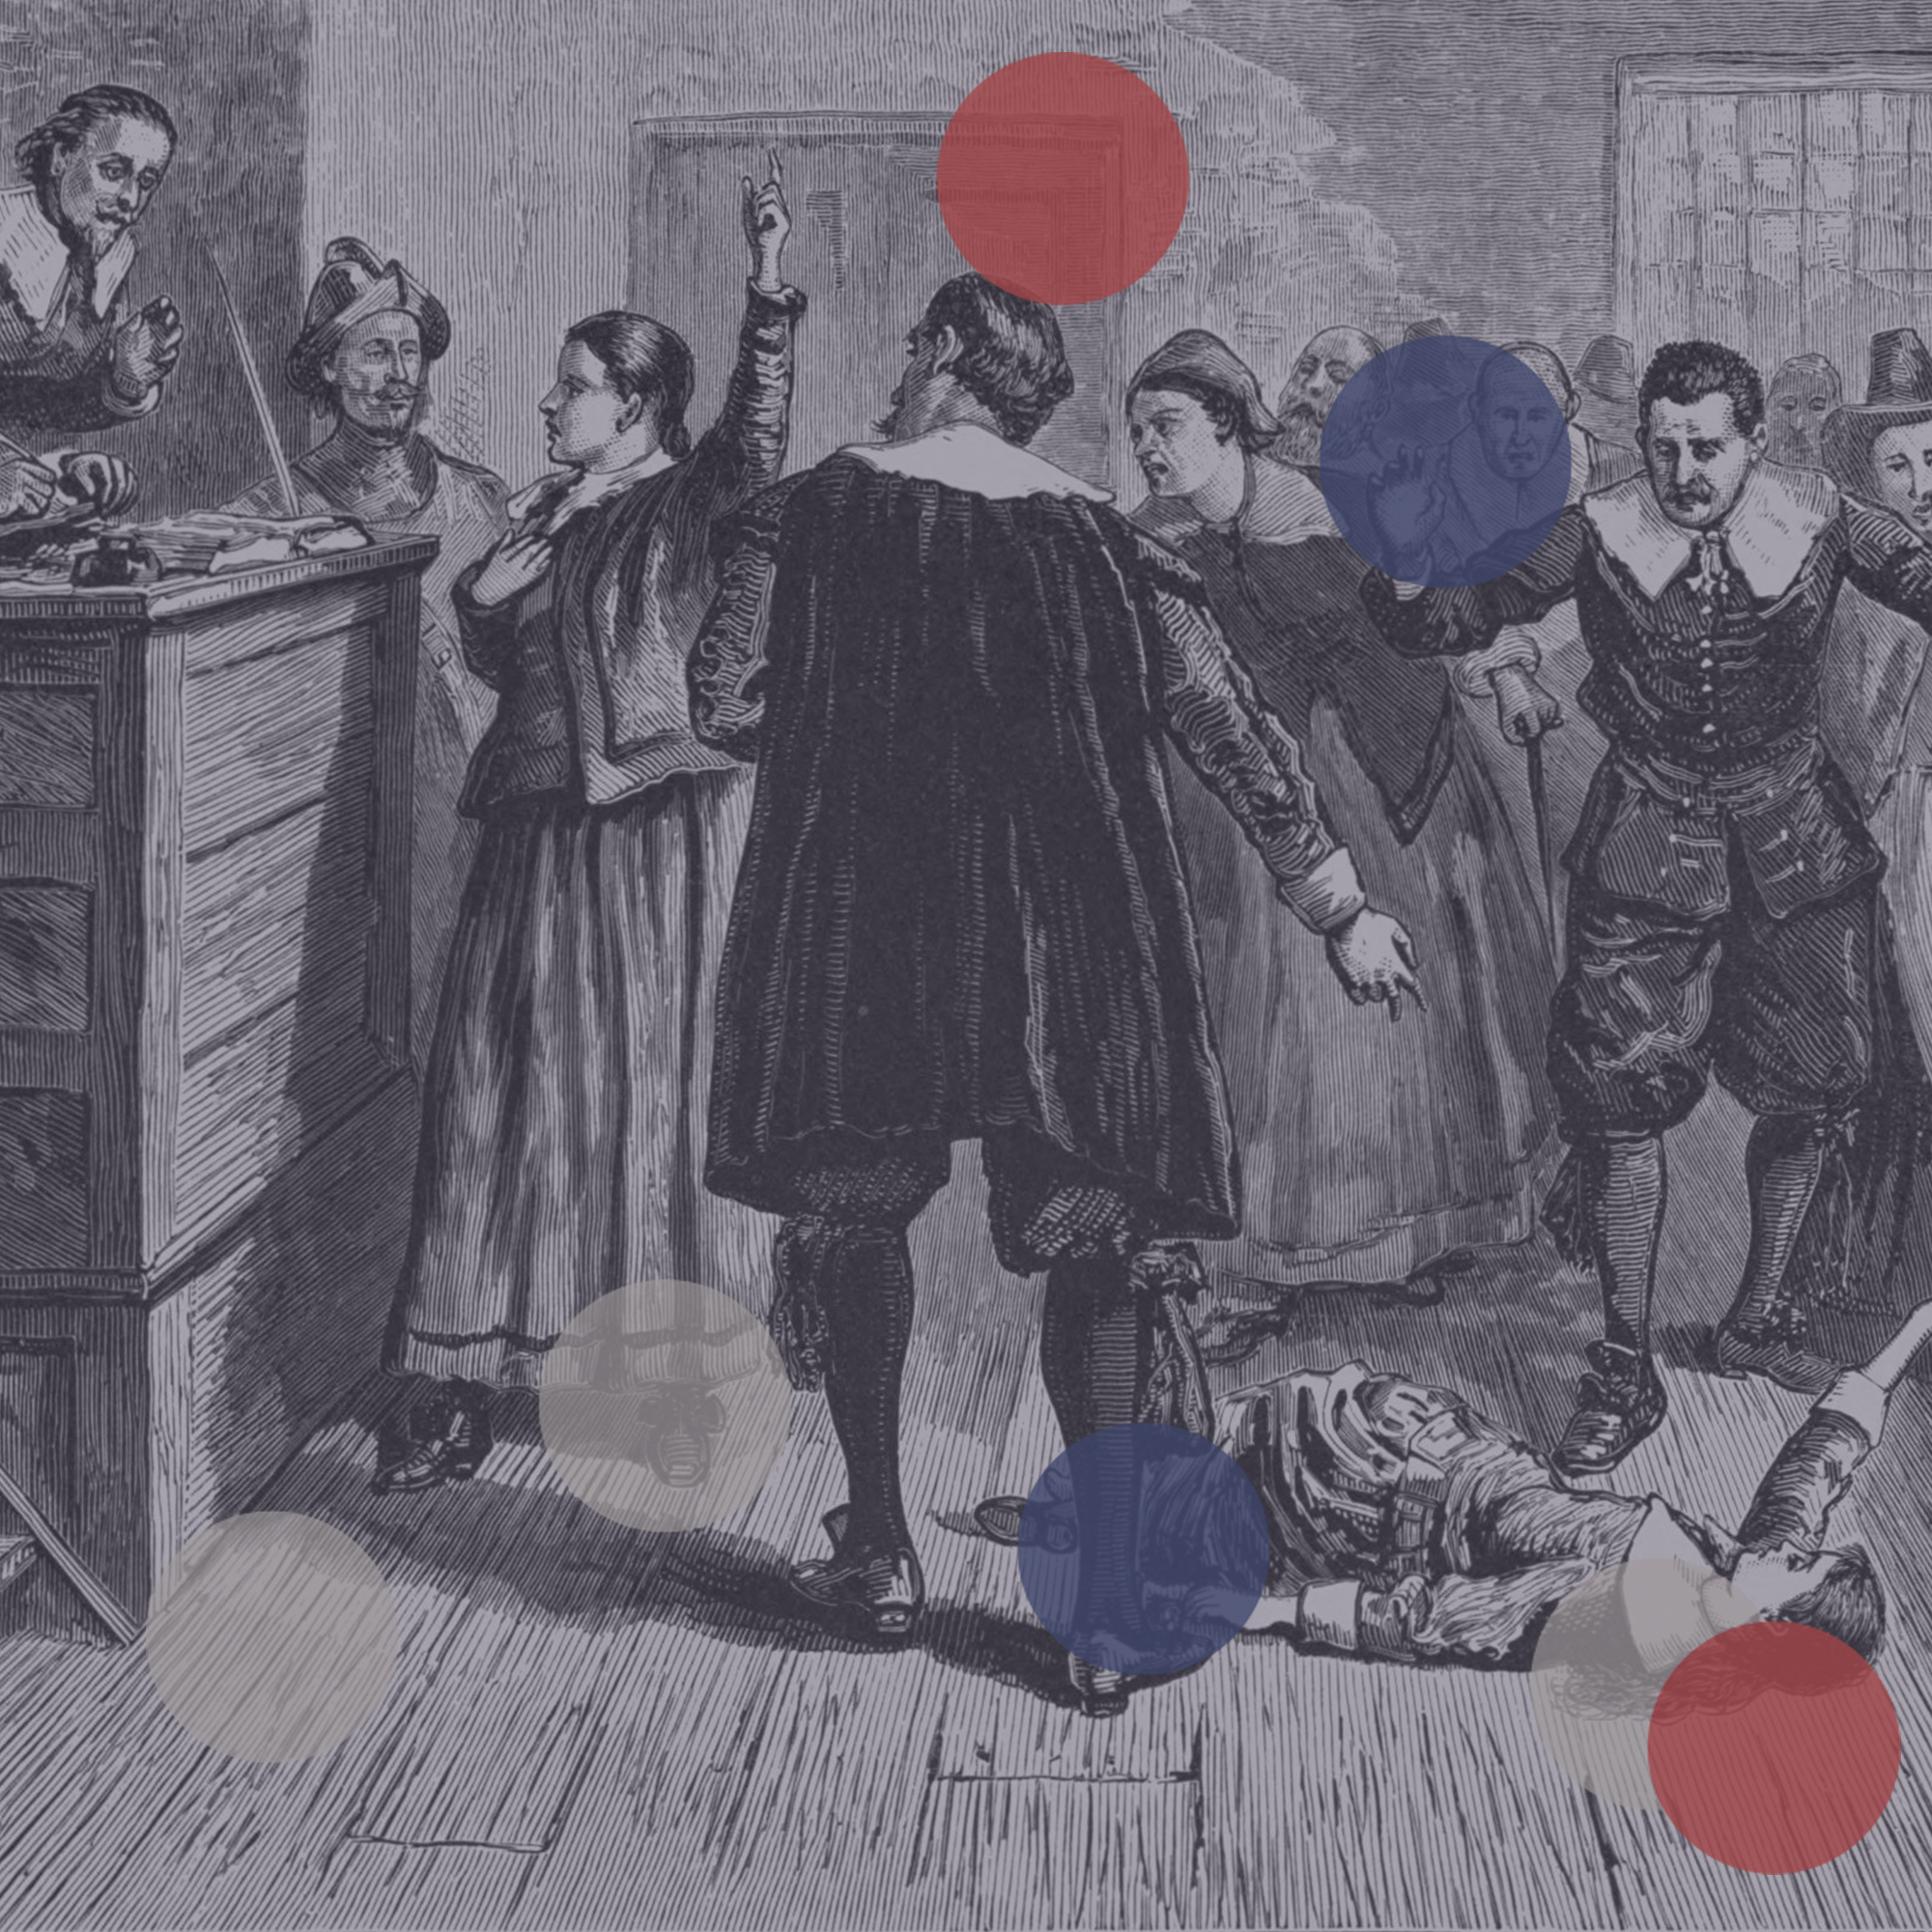 The End of the Salem Witch Trials